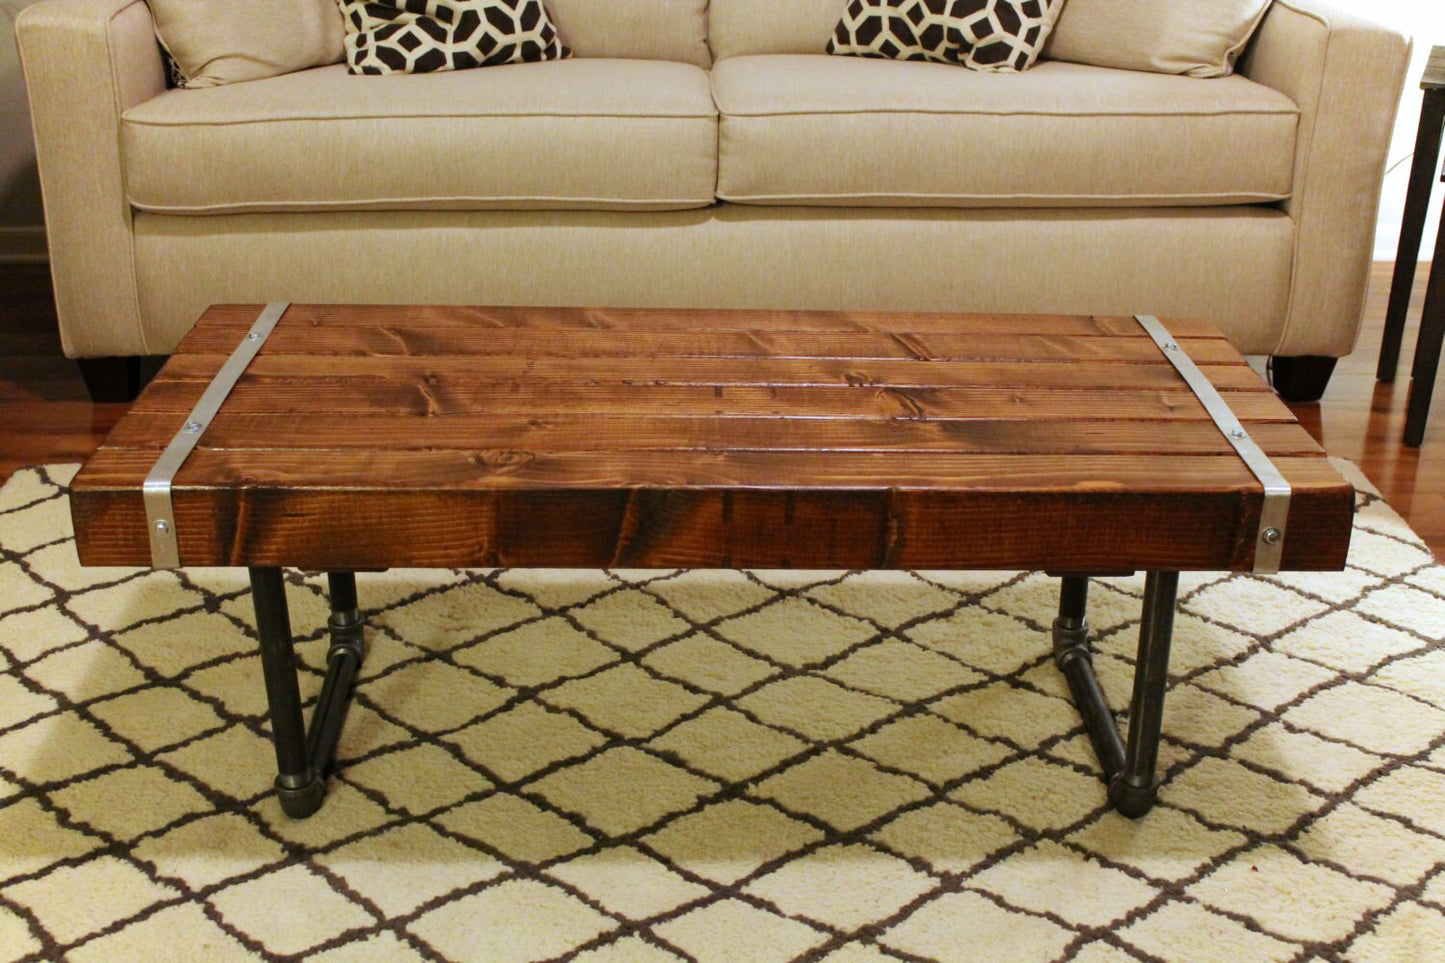 Steel and Wood Coffee Table - 3.5in Thick Table Top